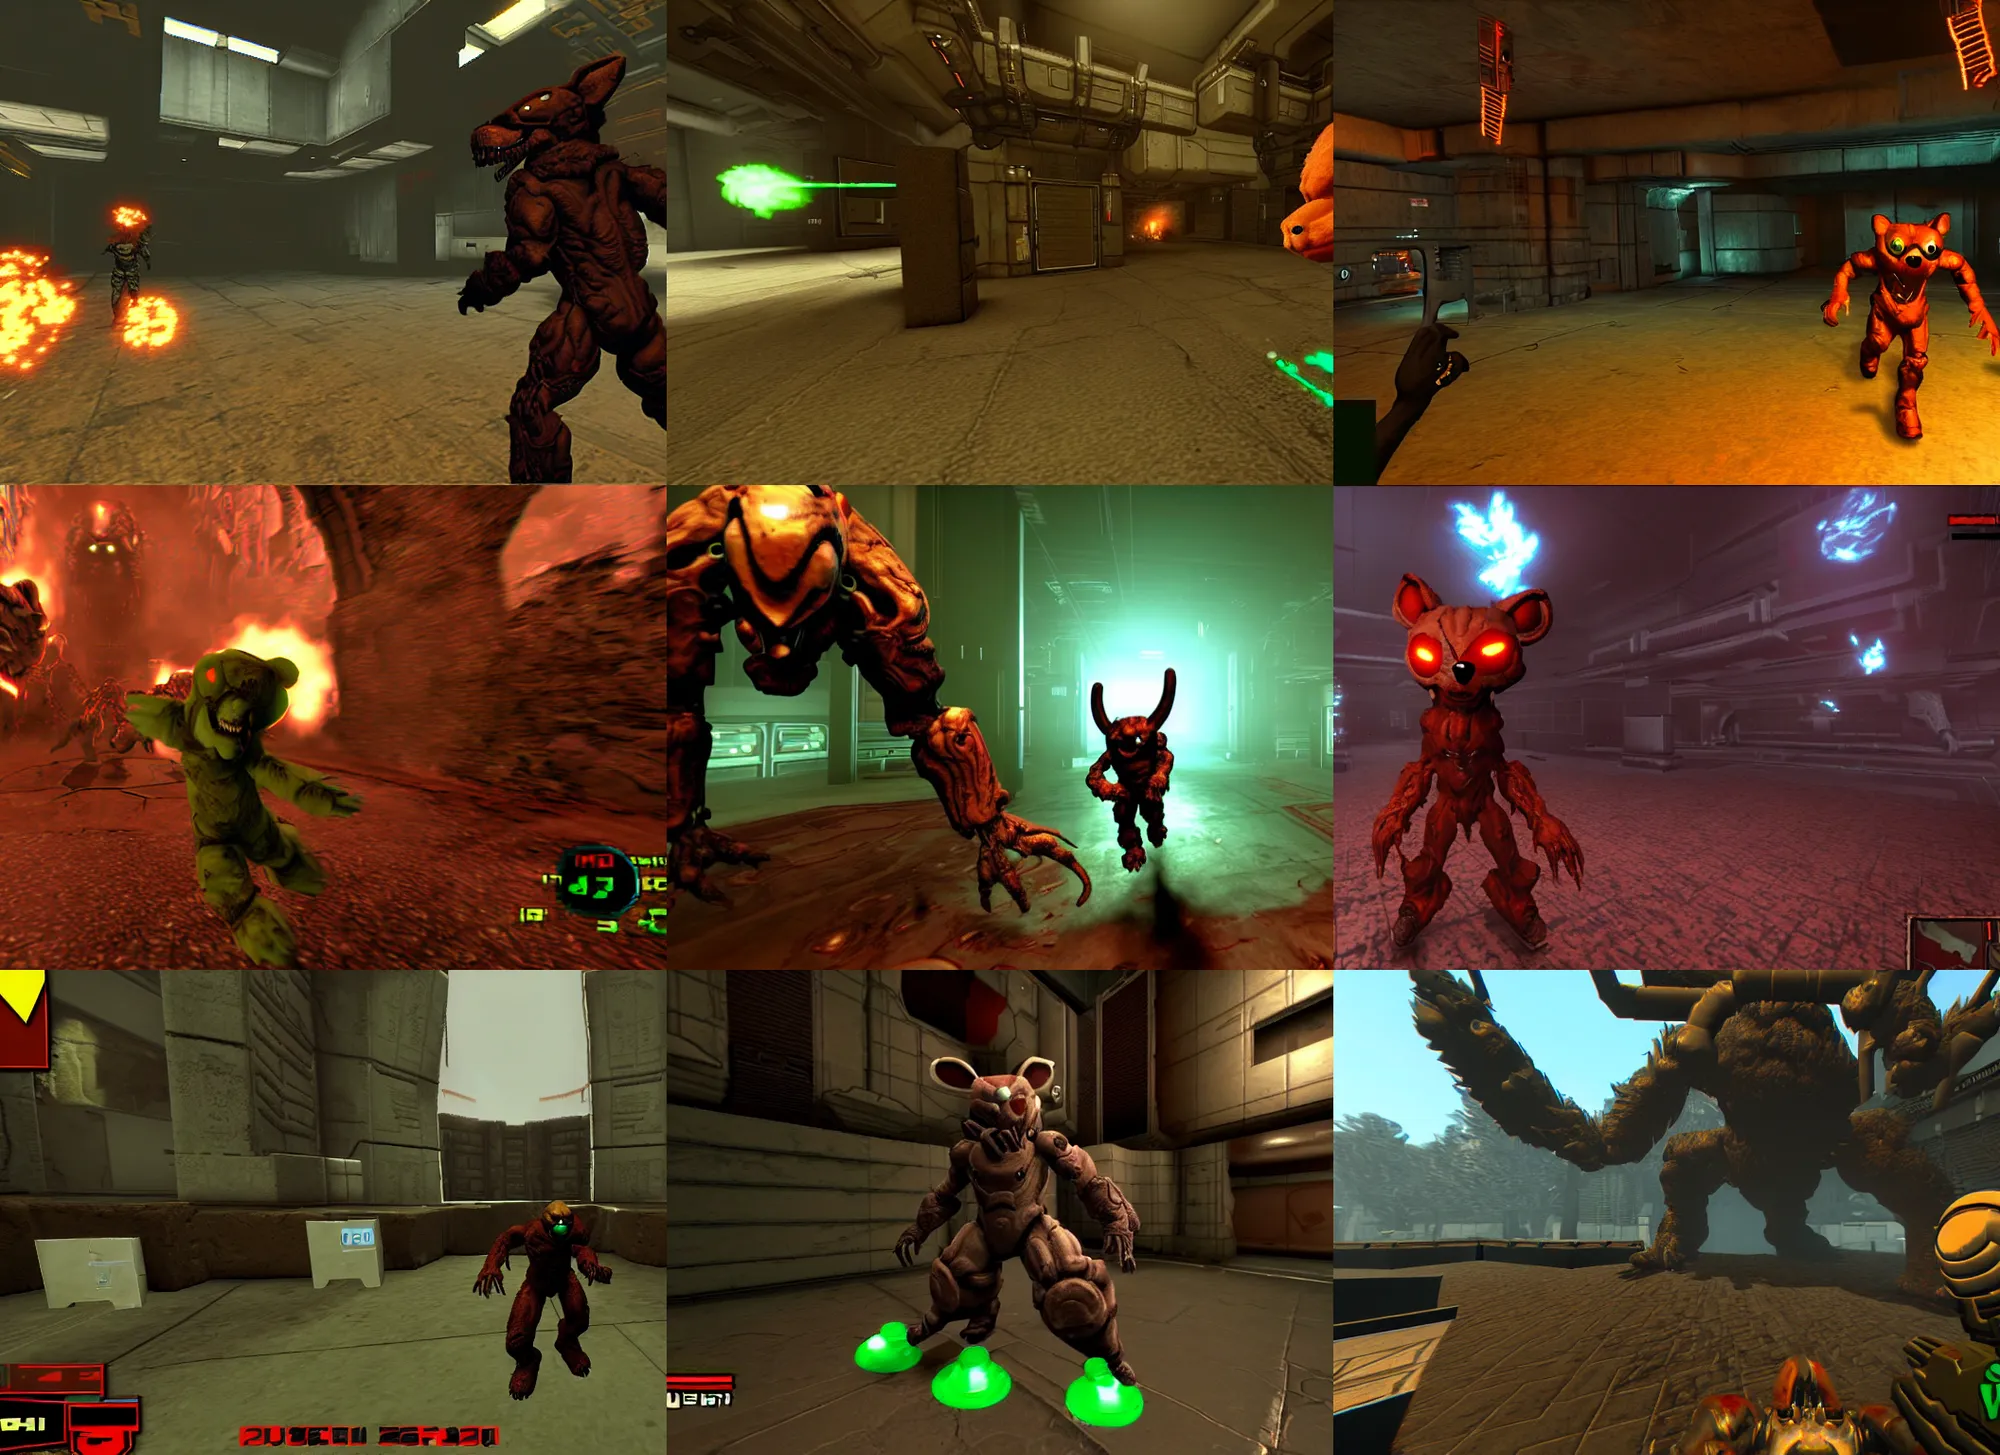 Prompt: Fursuit in a screenshot of the video game doom, the fursuit is running